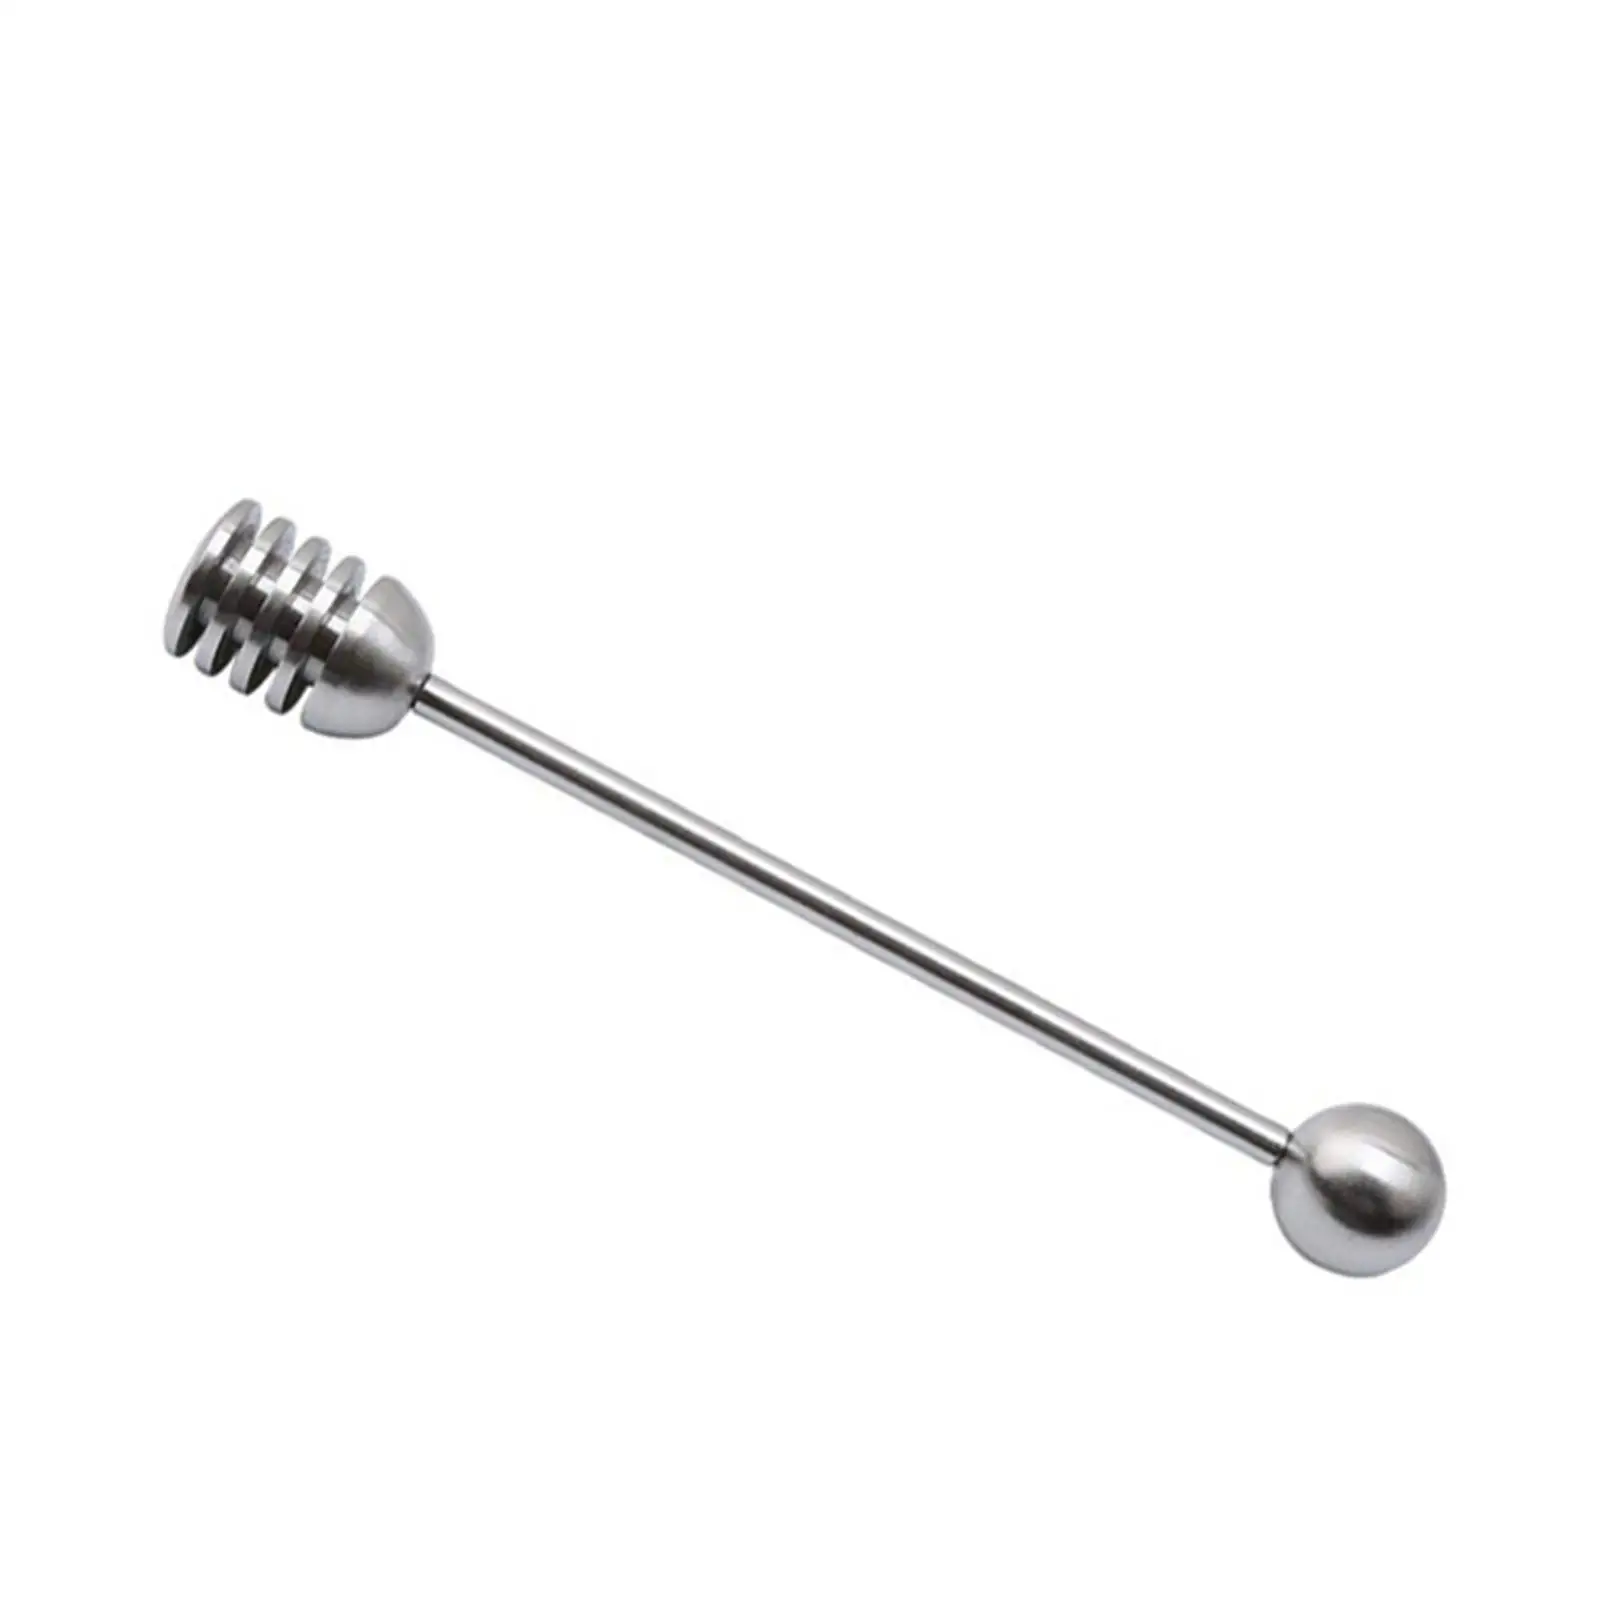 Stainless Steel 304 Honey Stirrer Mixing Stick Tool Kitchen Gadgets 6.3inch Long Wear Resistant Honey Stiring Tool